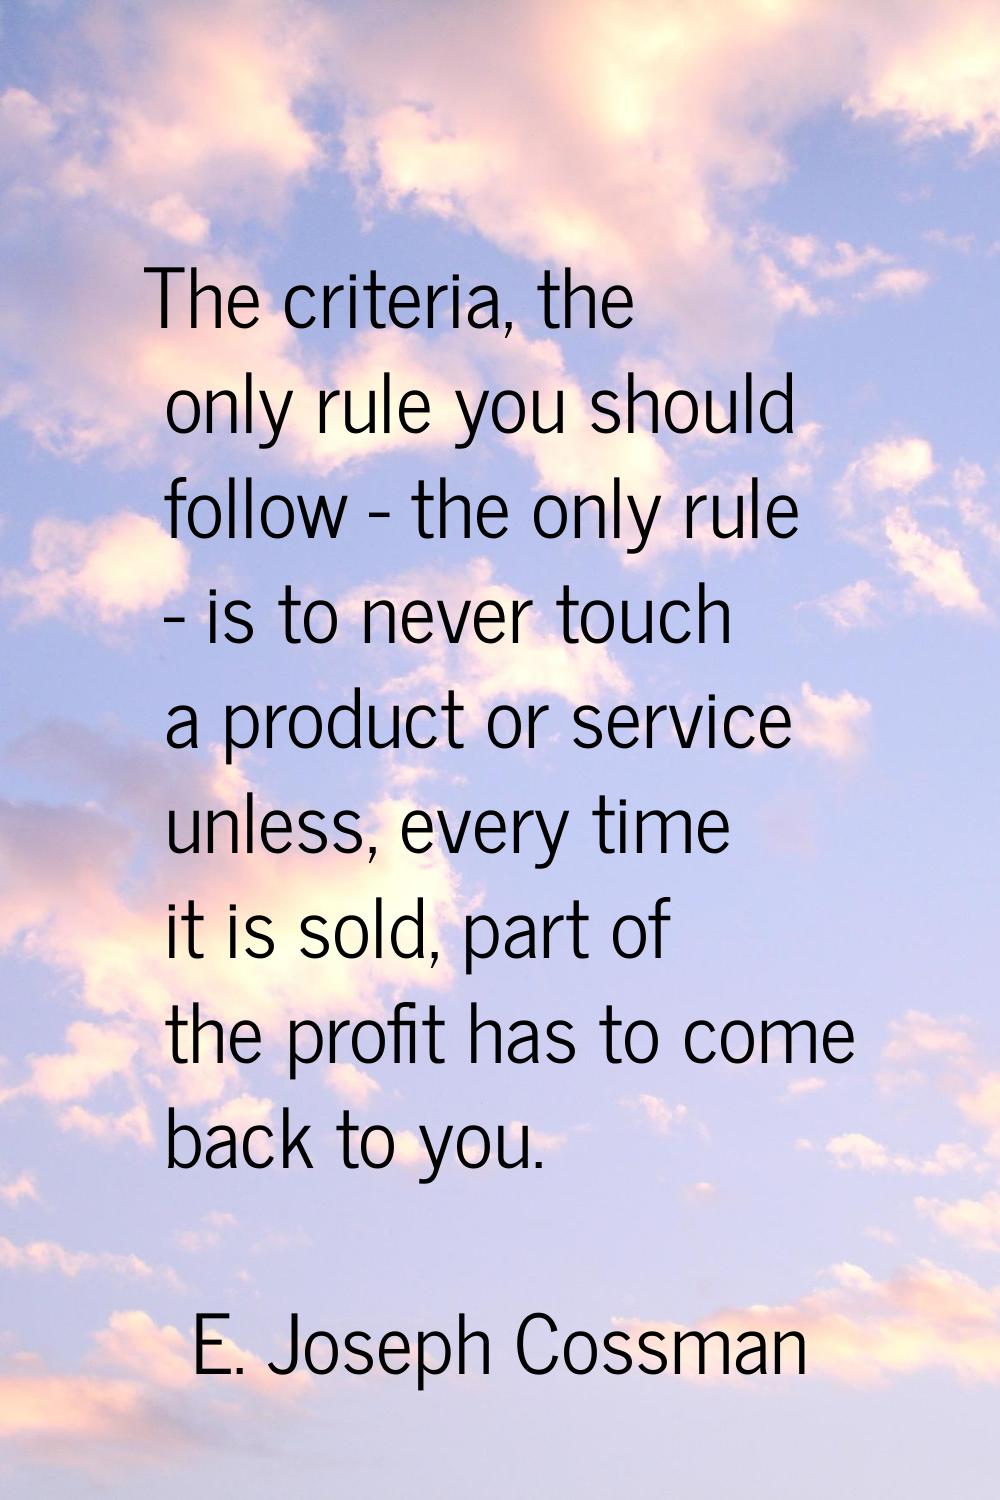 The criteria, the only rule you should follow - the only rule - is to never touch a product or serv